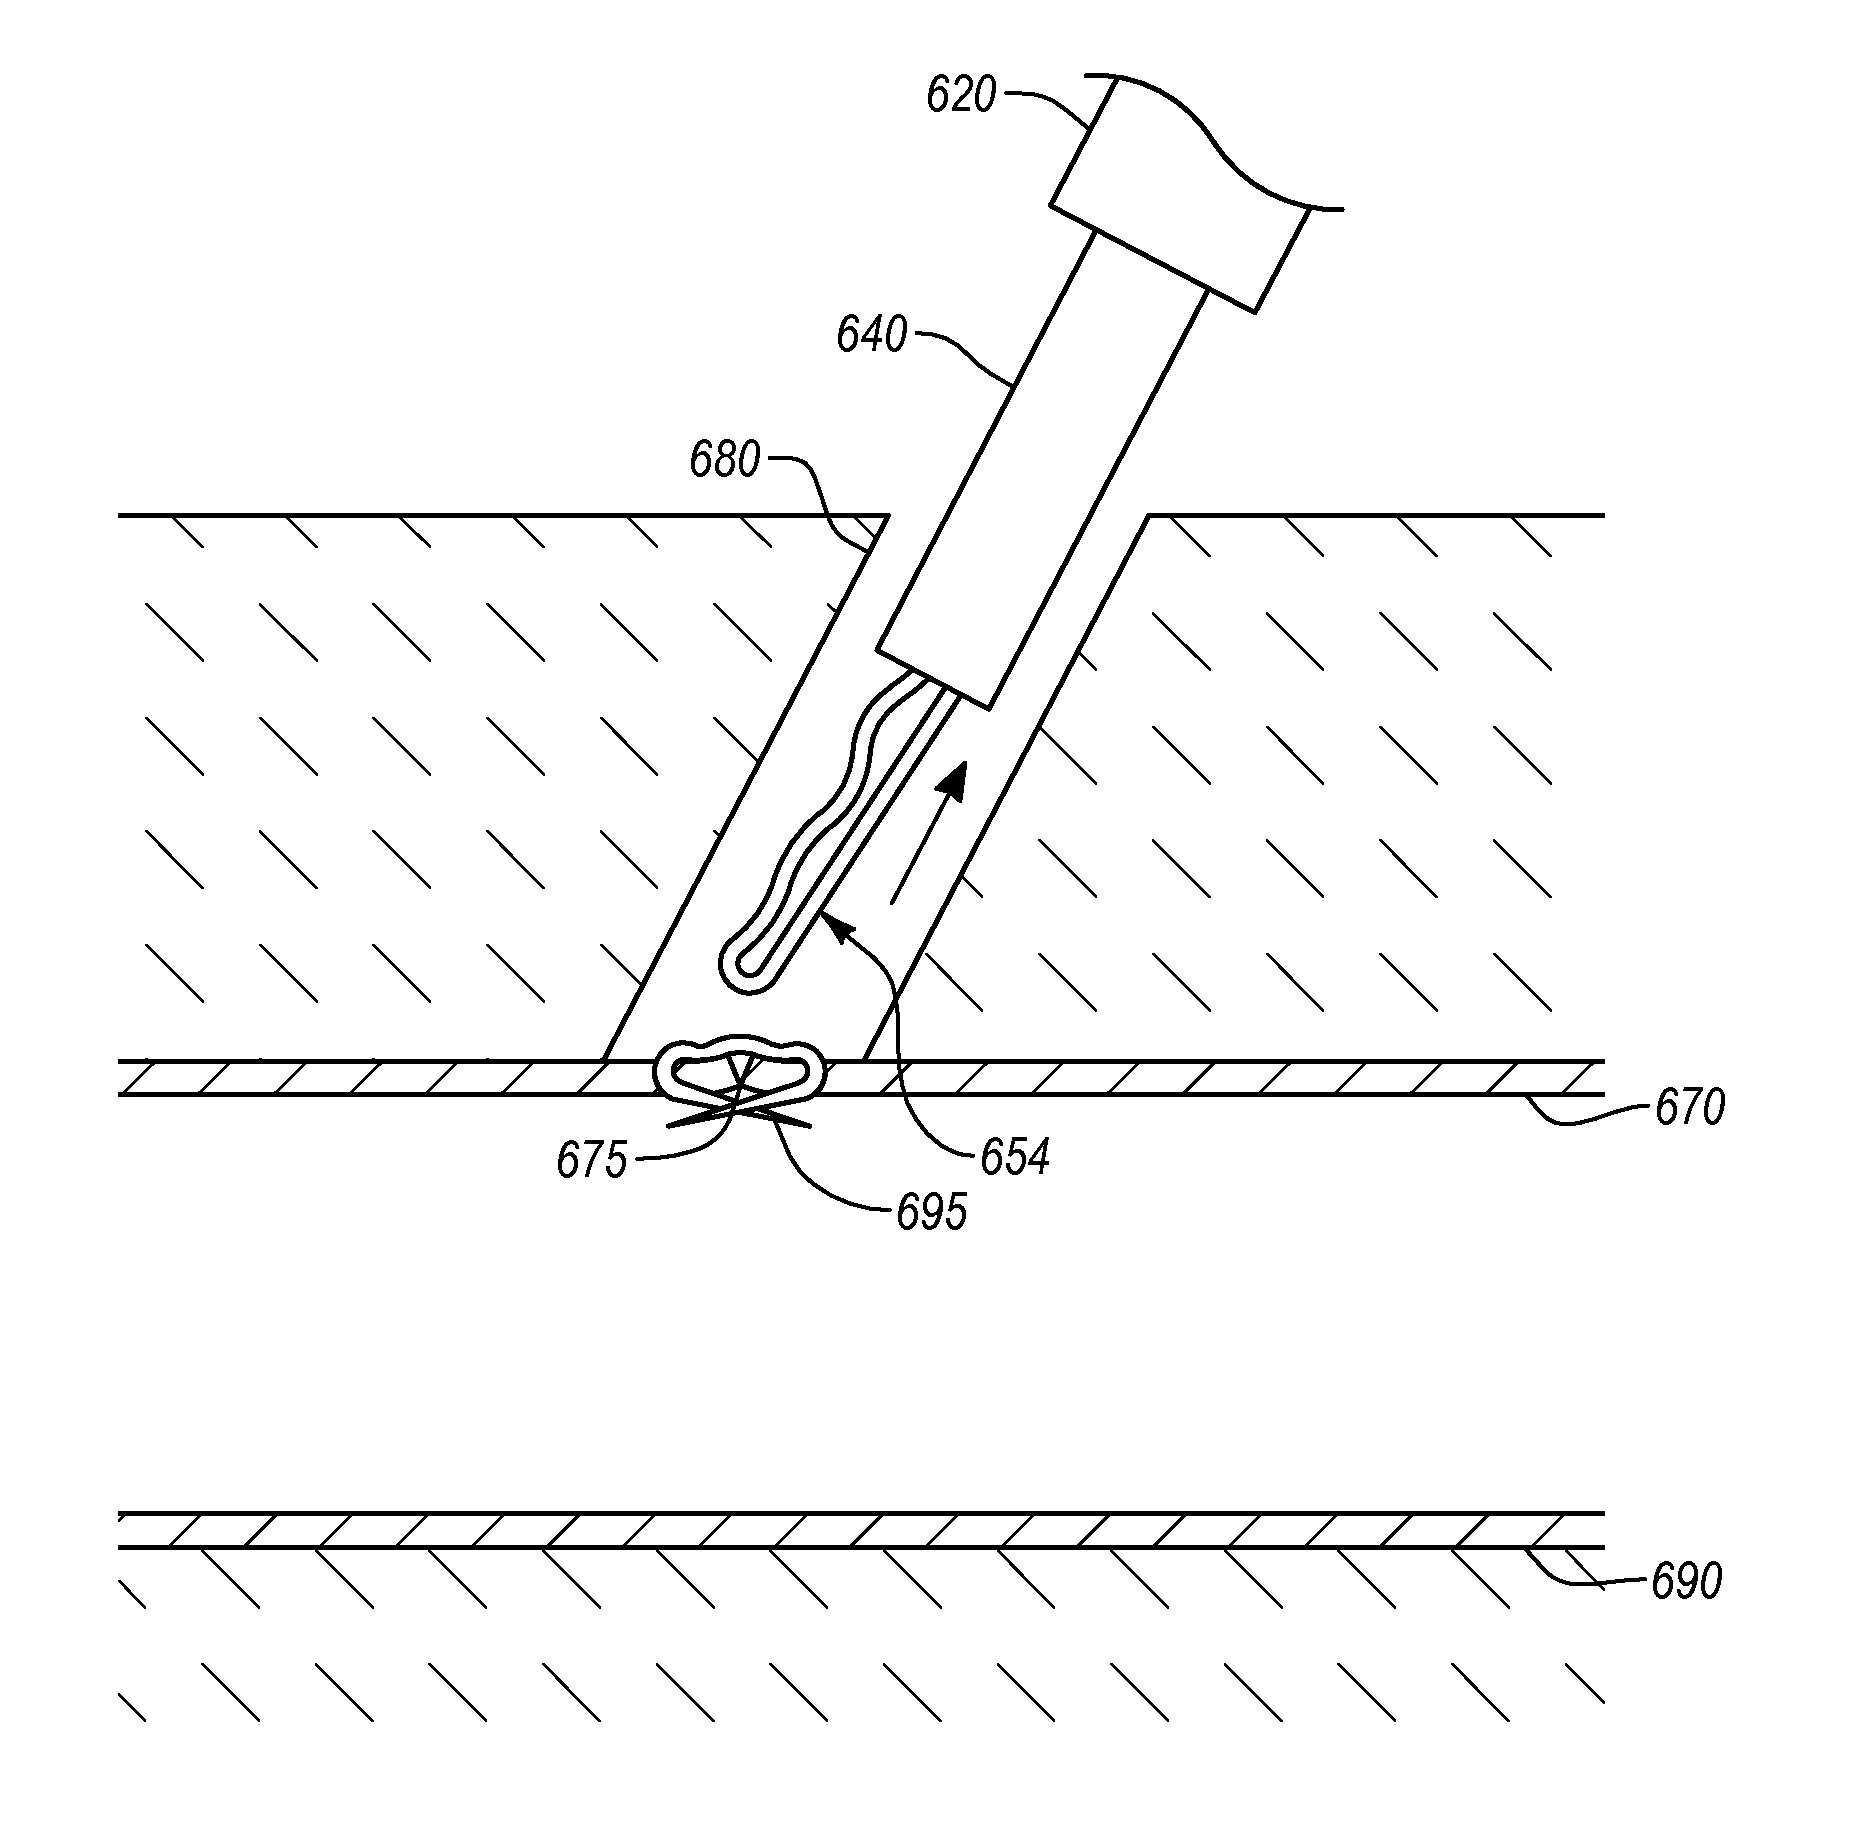 Closure devices, systems, and methods